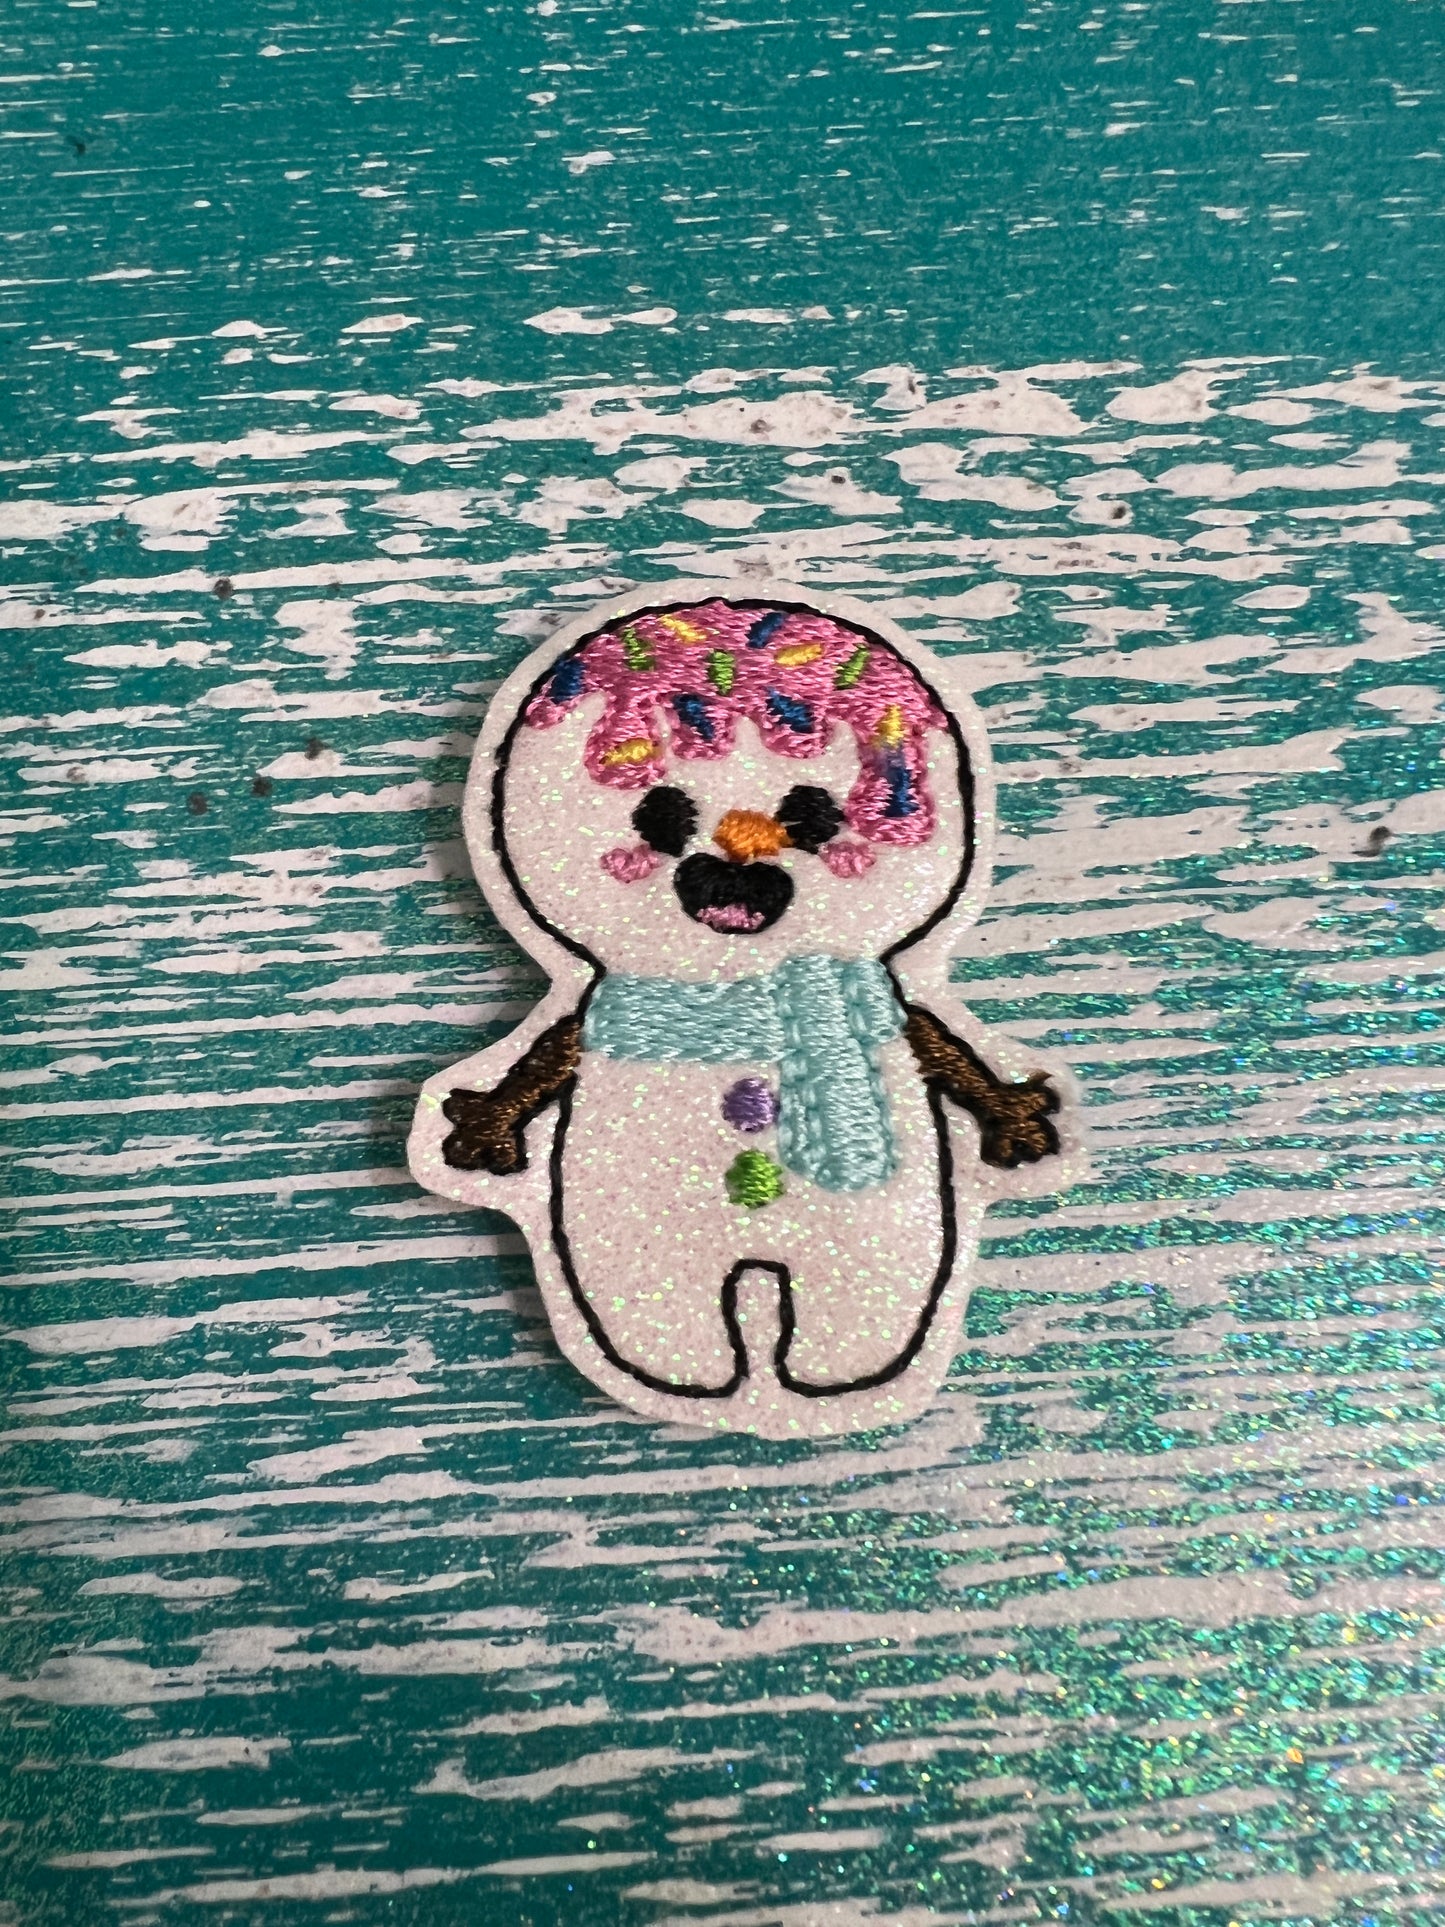 Sparkly snowman with frosting and sprinkles